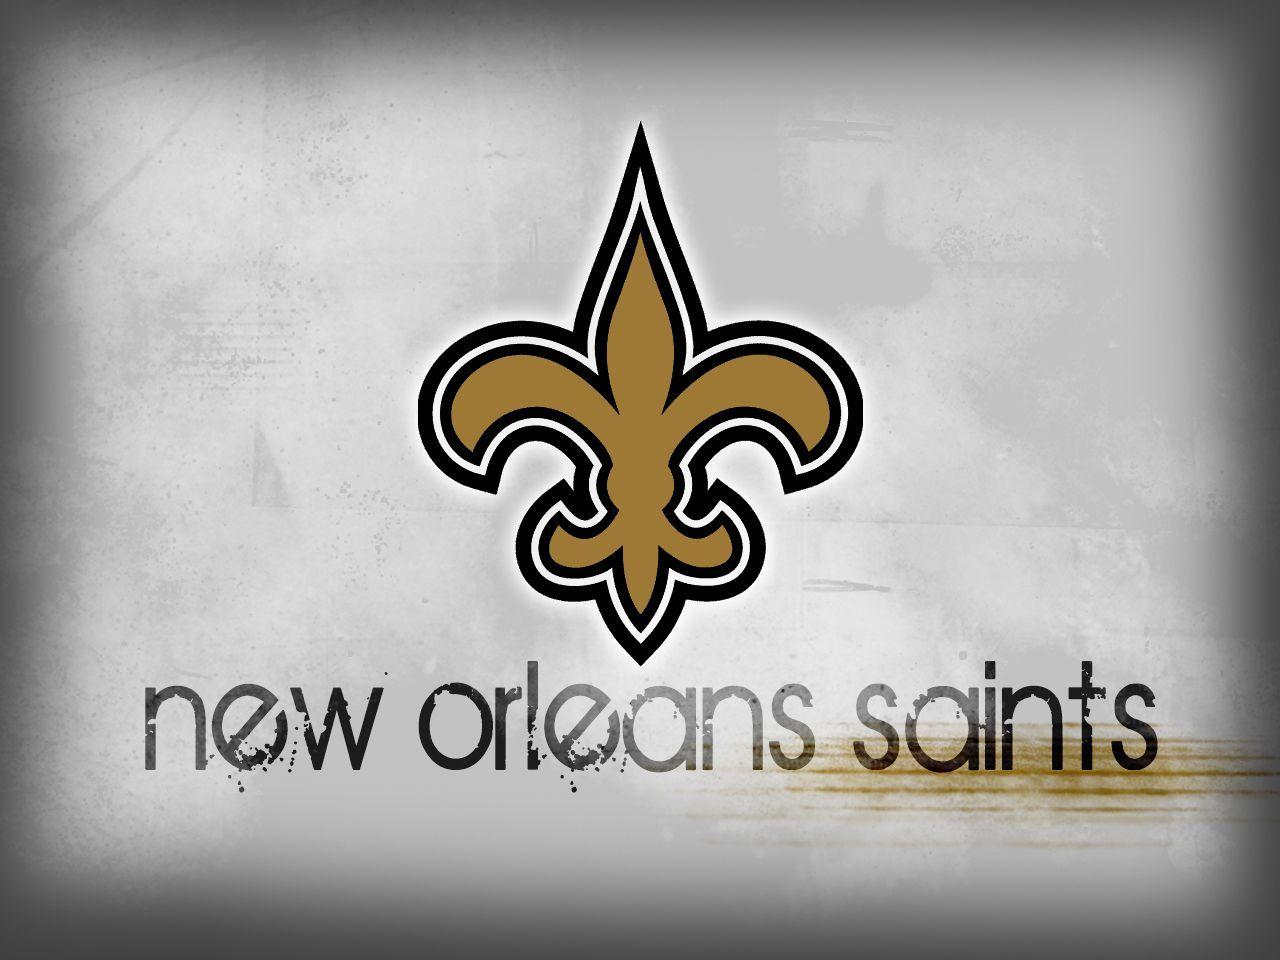 Wallpaper of the day: New Orleans Saints. New Orleans Saints